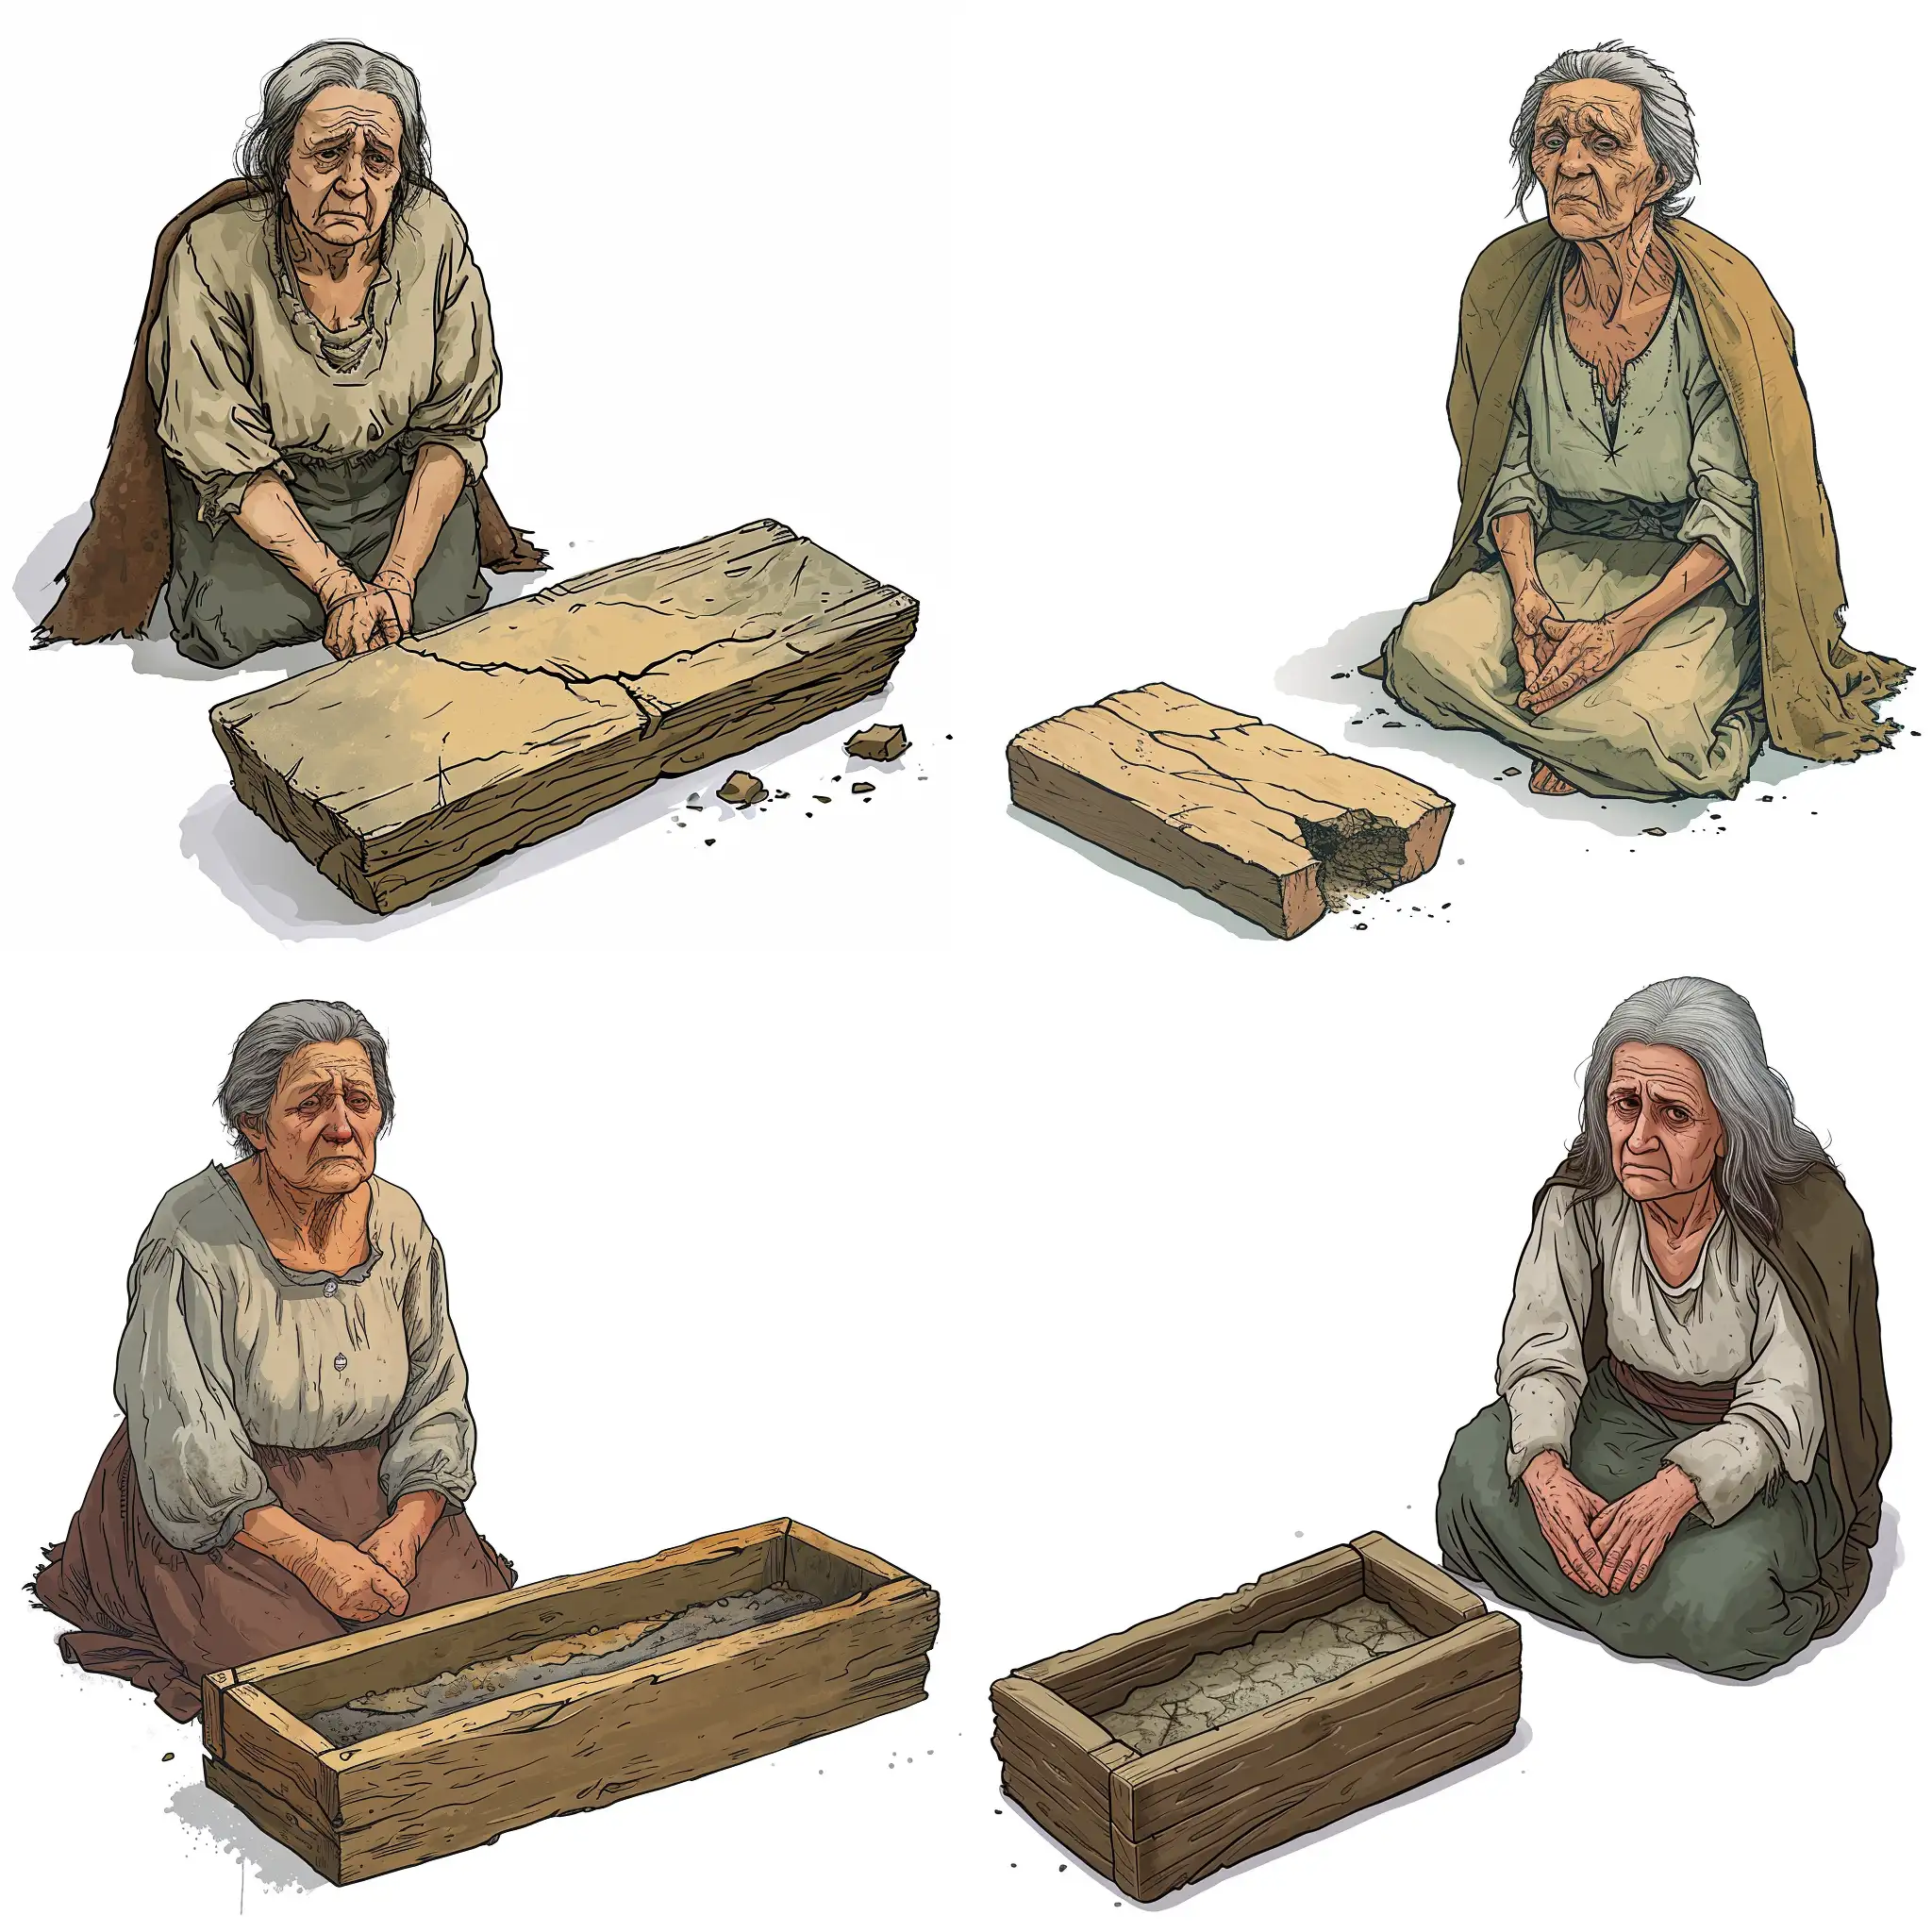 Elderly-Russian-Woman-Reflecting-by-Weathered-Trough-in-Caricature-Style